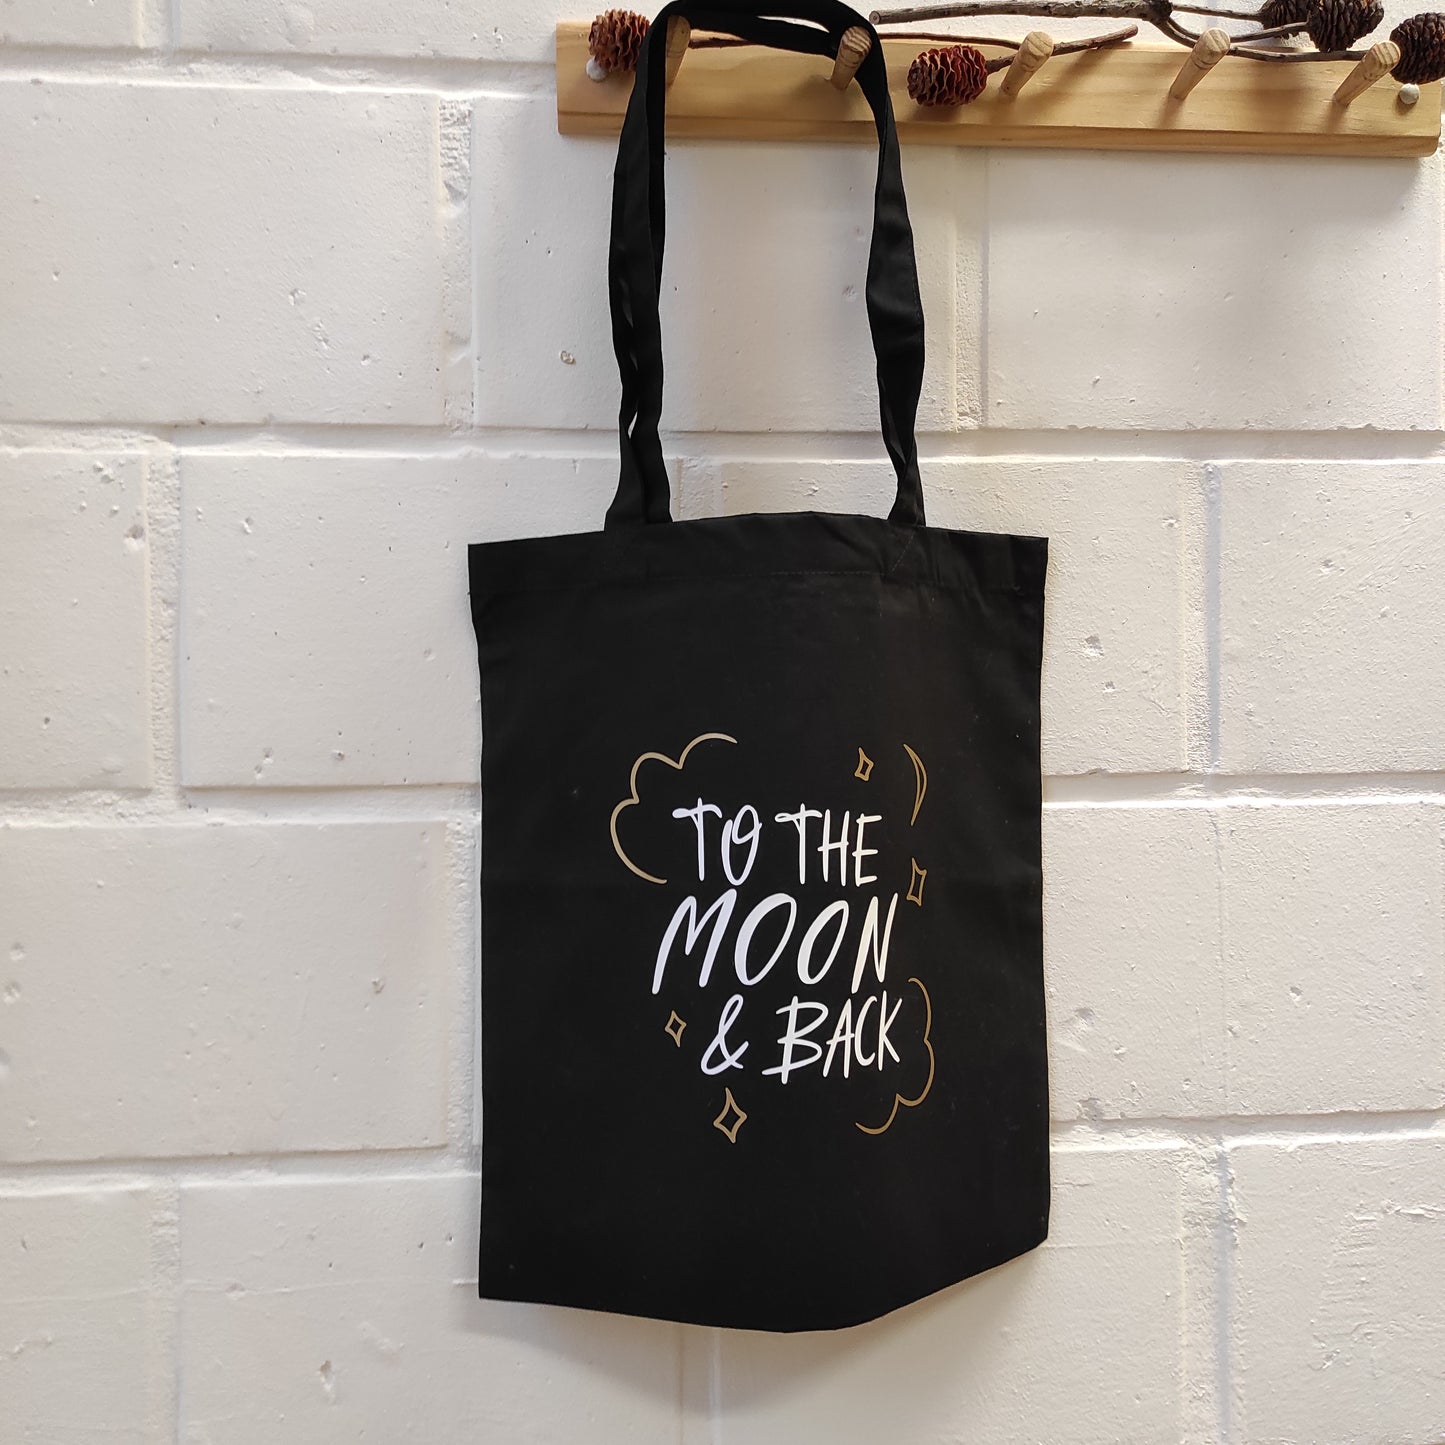 Tote bag "To the moon and back"